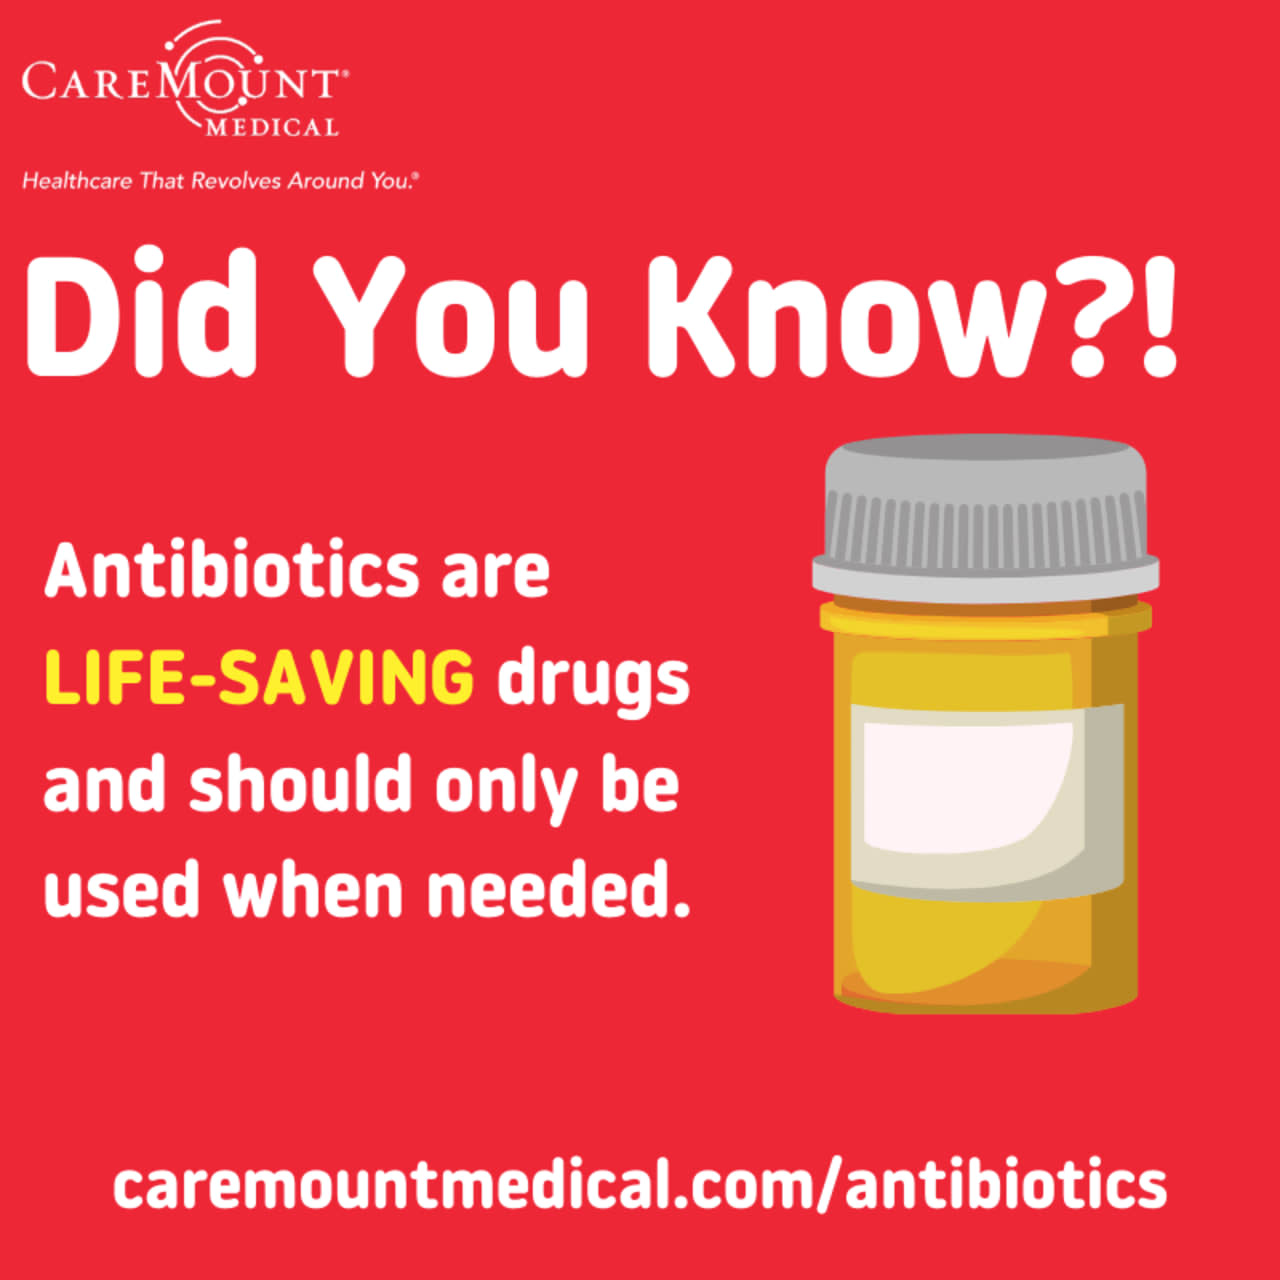 CareMount Medical has some tips on when to use antibiotics.